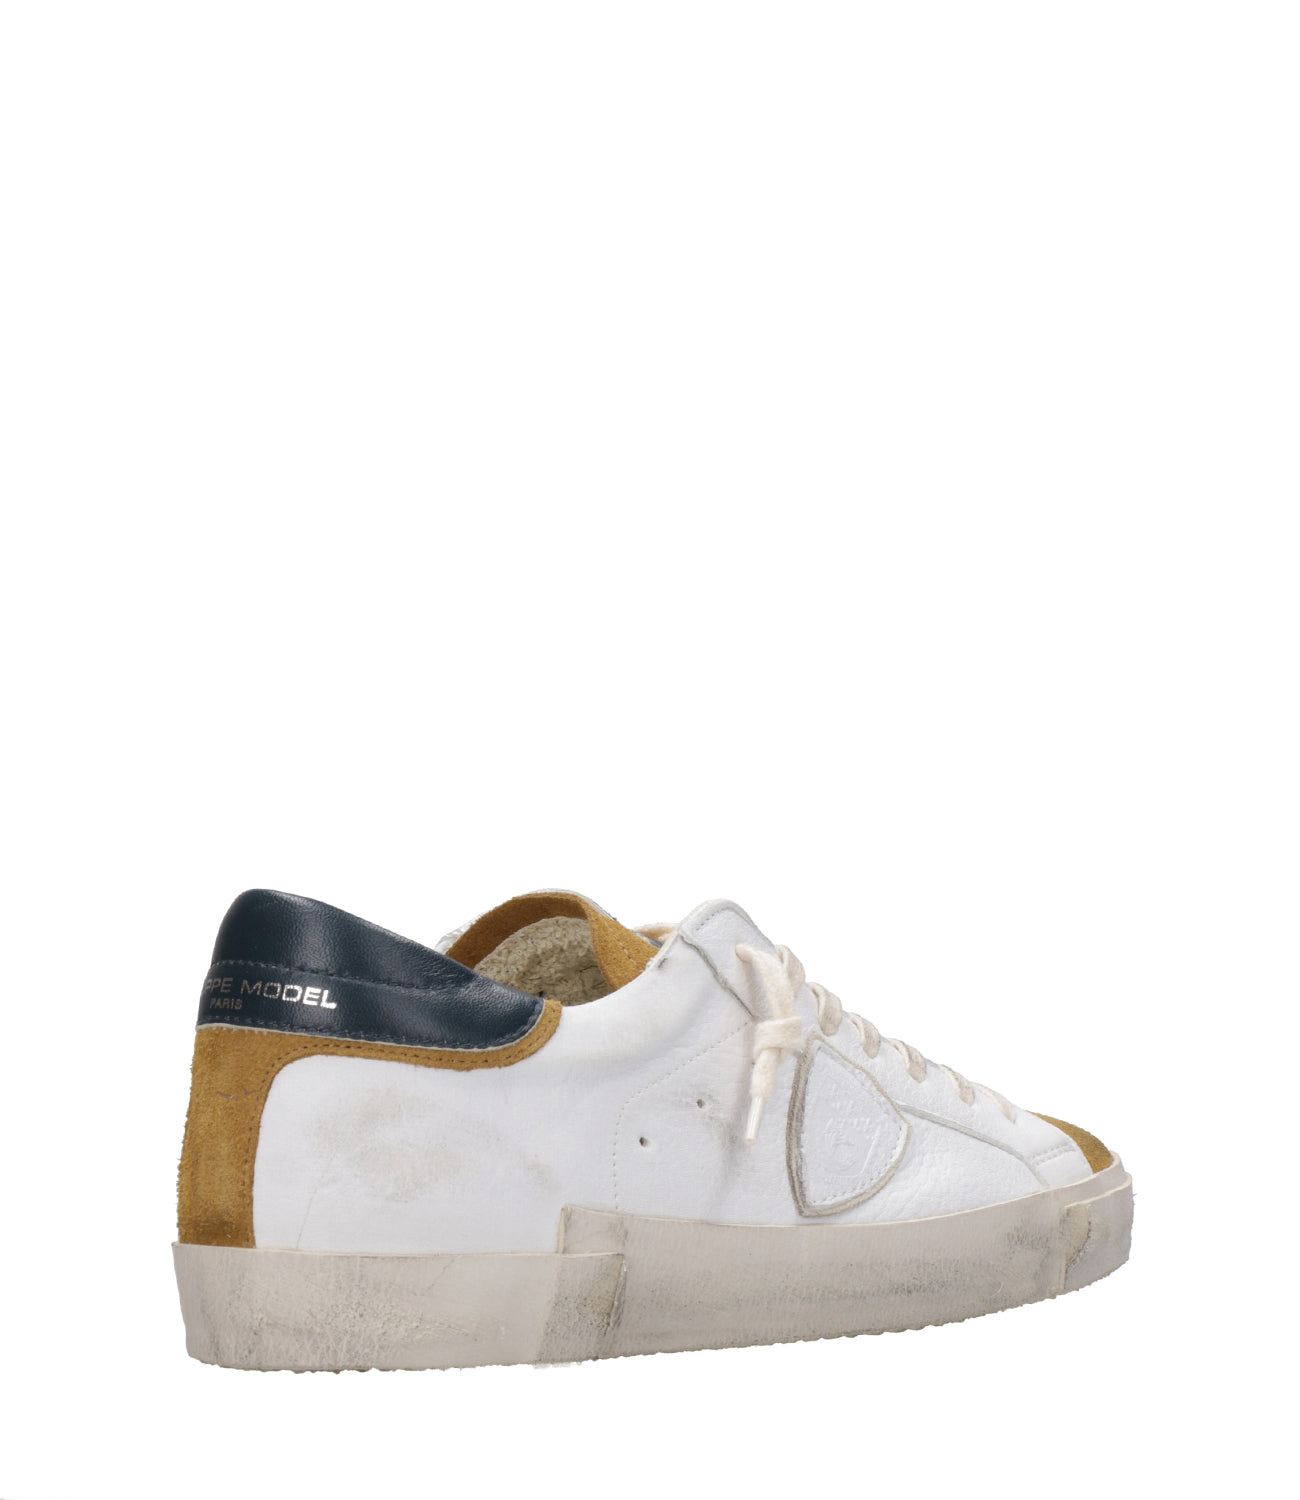 Philippe Model | PRSX Low White and Mustard Sneakers